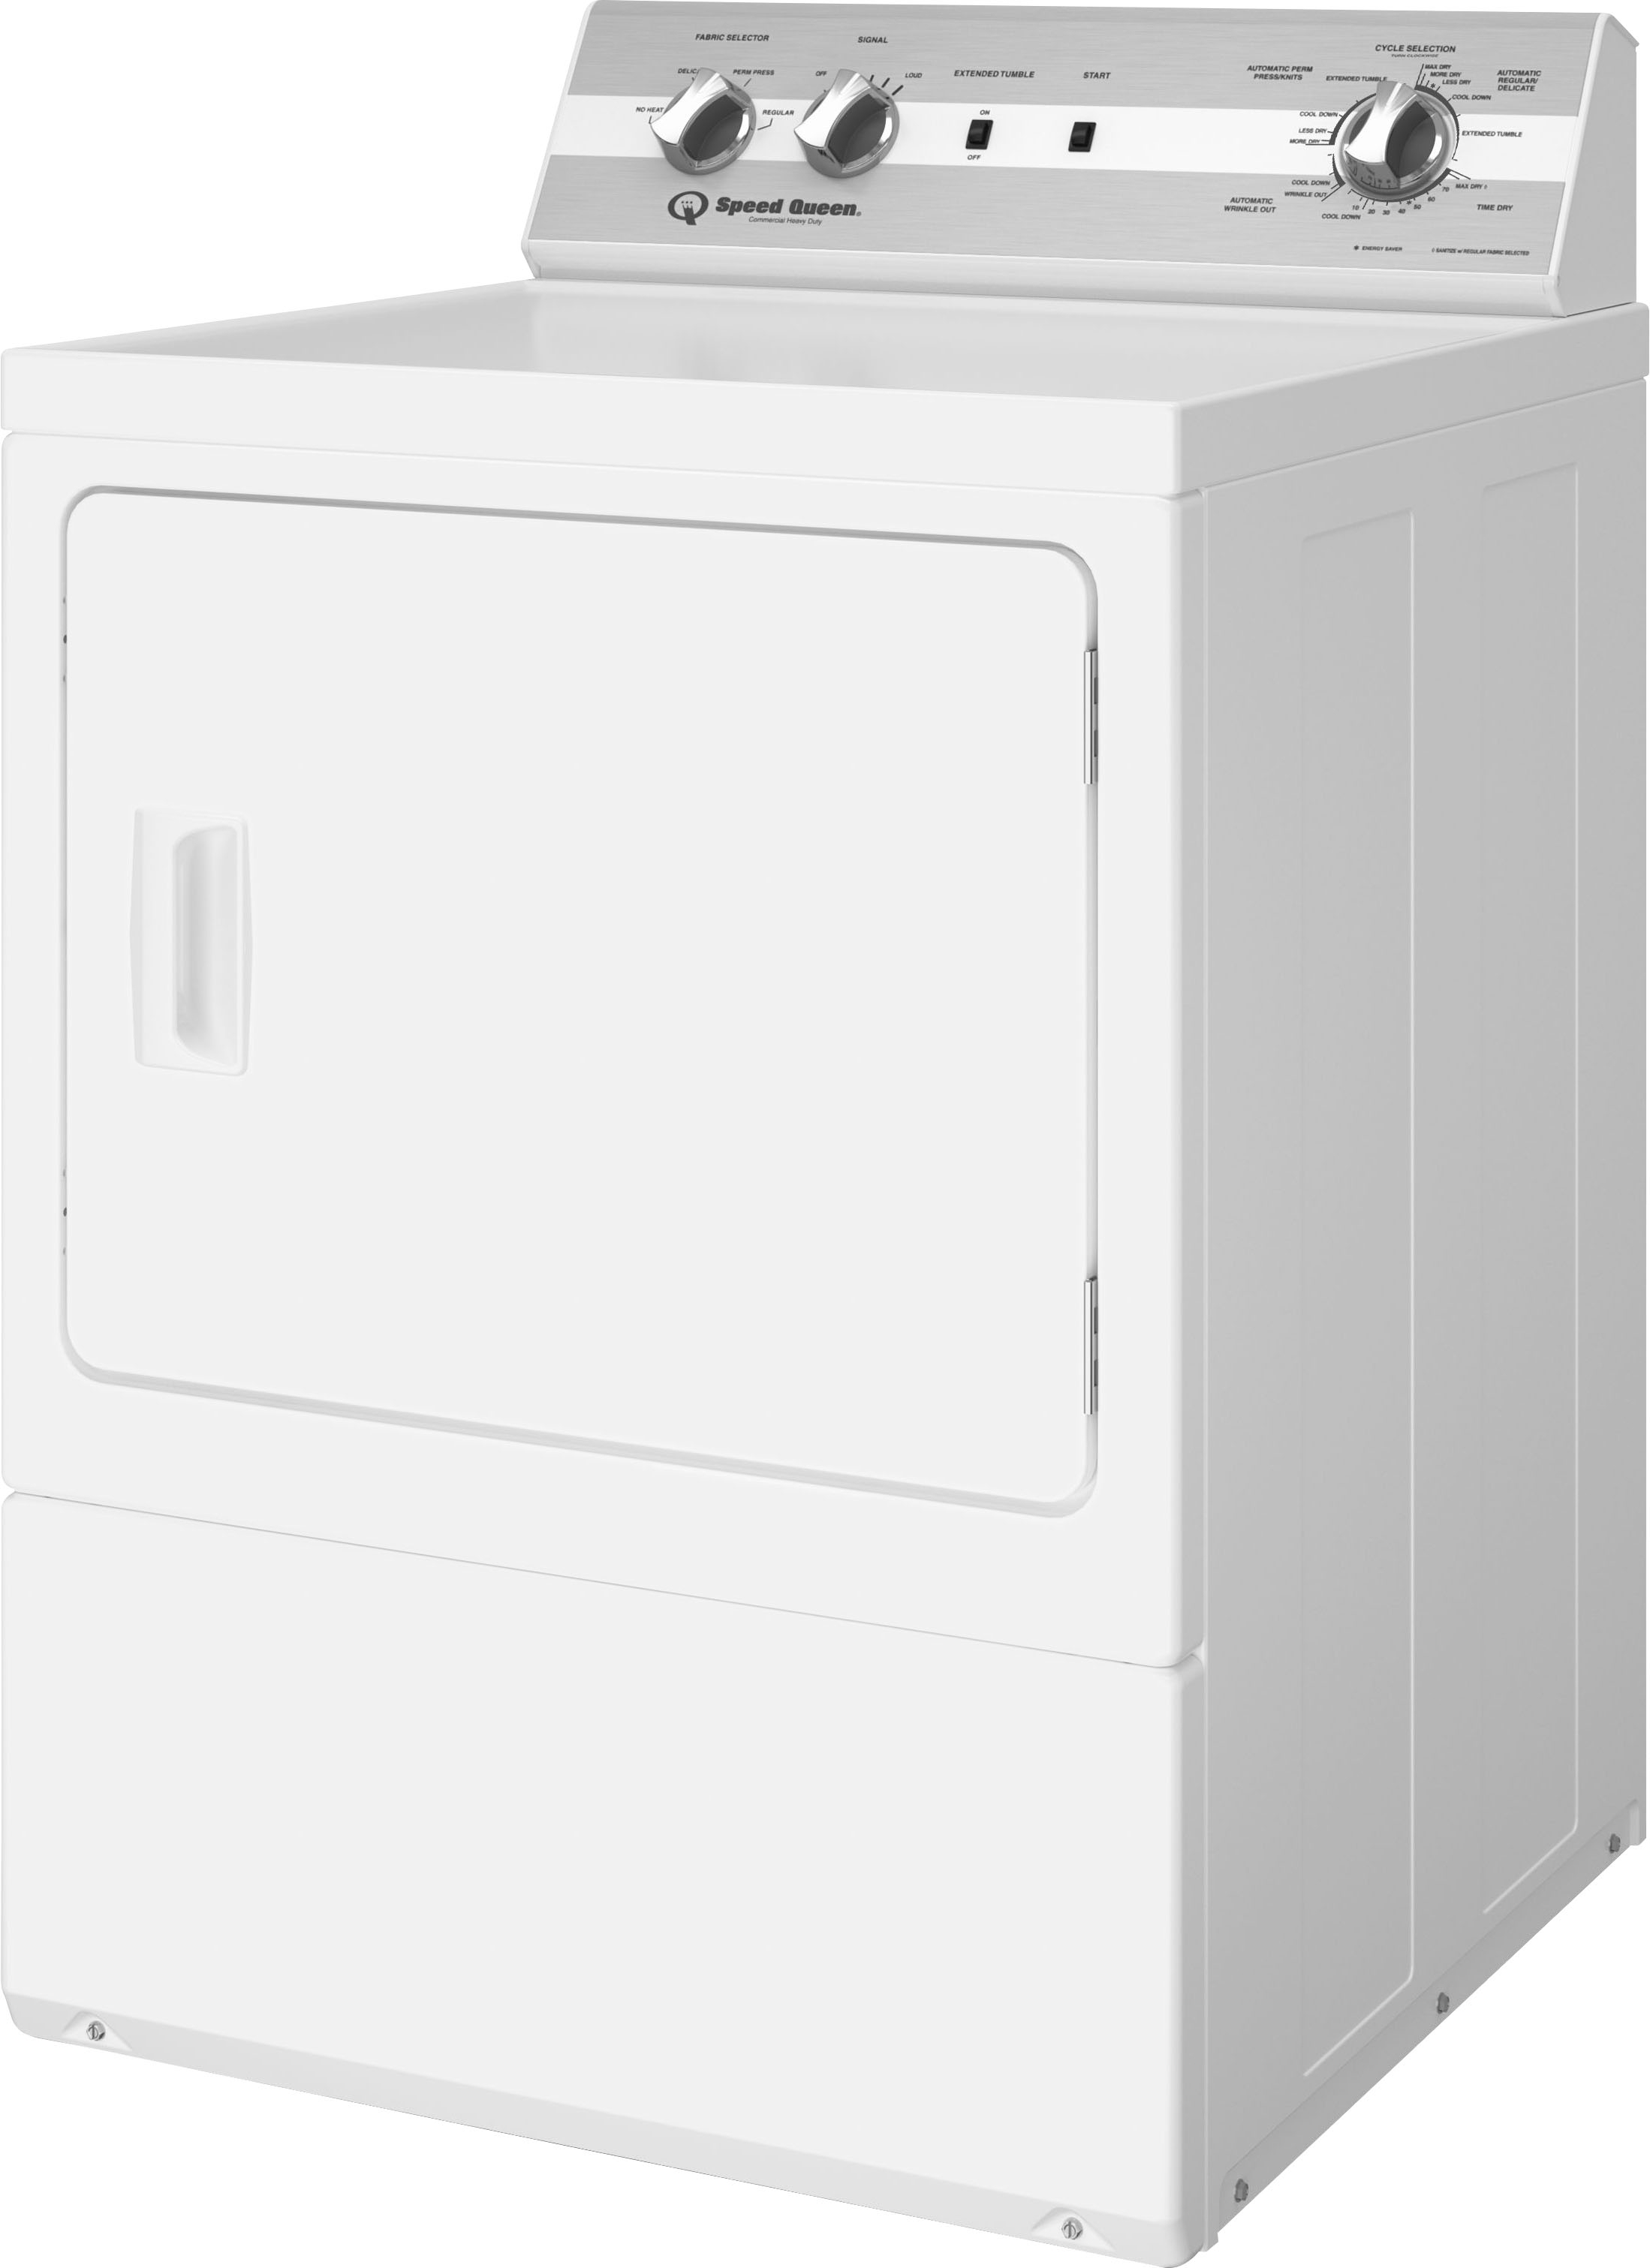 Angle View: Speed Queen - DC5 Sanitizing Electric Dryer - White